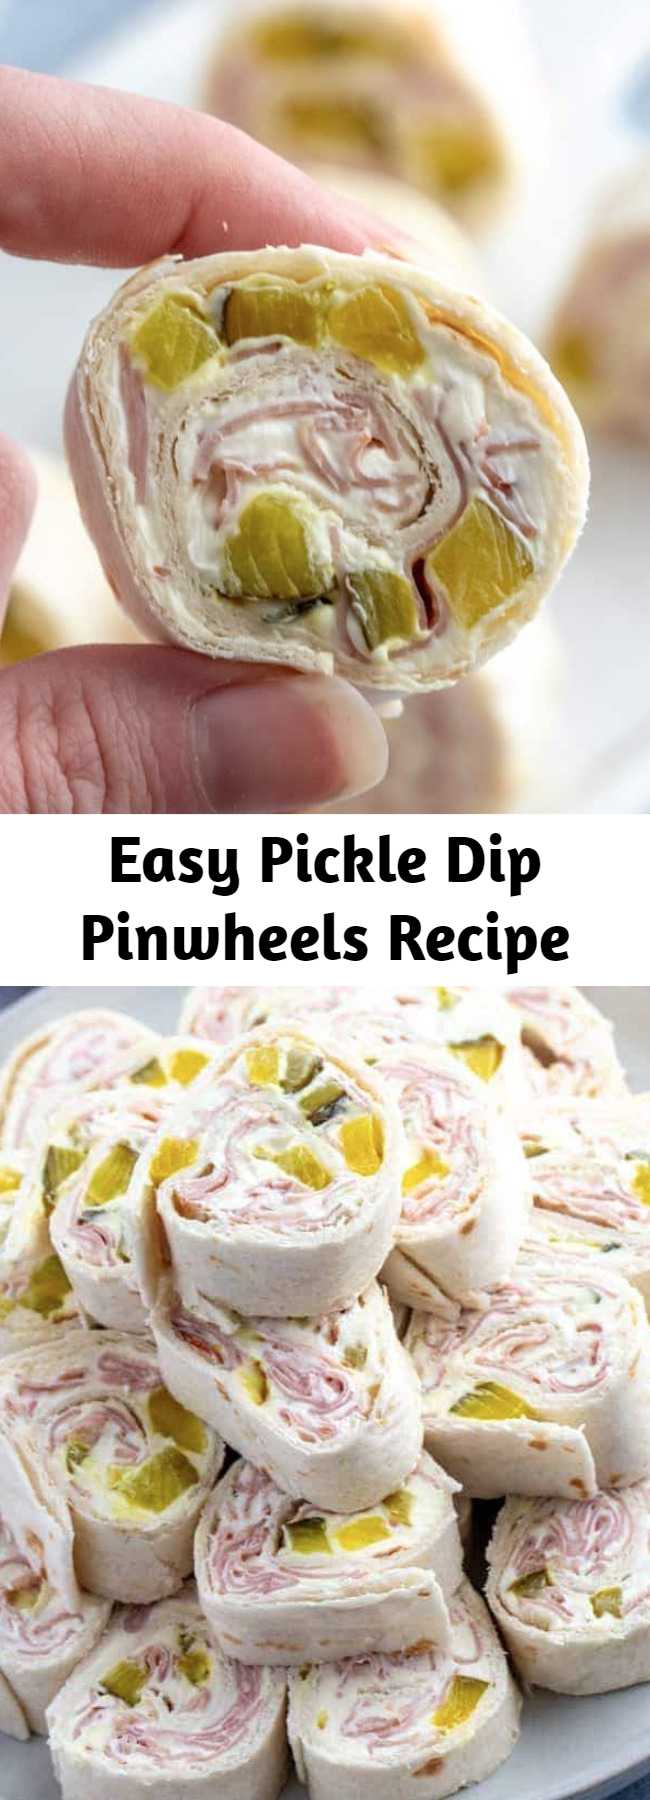 Easy Pickle Dip Pinwheels Recipe - Creamy, crunchy and full of flavor these Pickle Dip Pinwheels are full of cream cheese, sliced ham and diced pickles. The perfect party appetizer. #appetizer #pickles #pinwheels #partyfood #easyrecipe